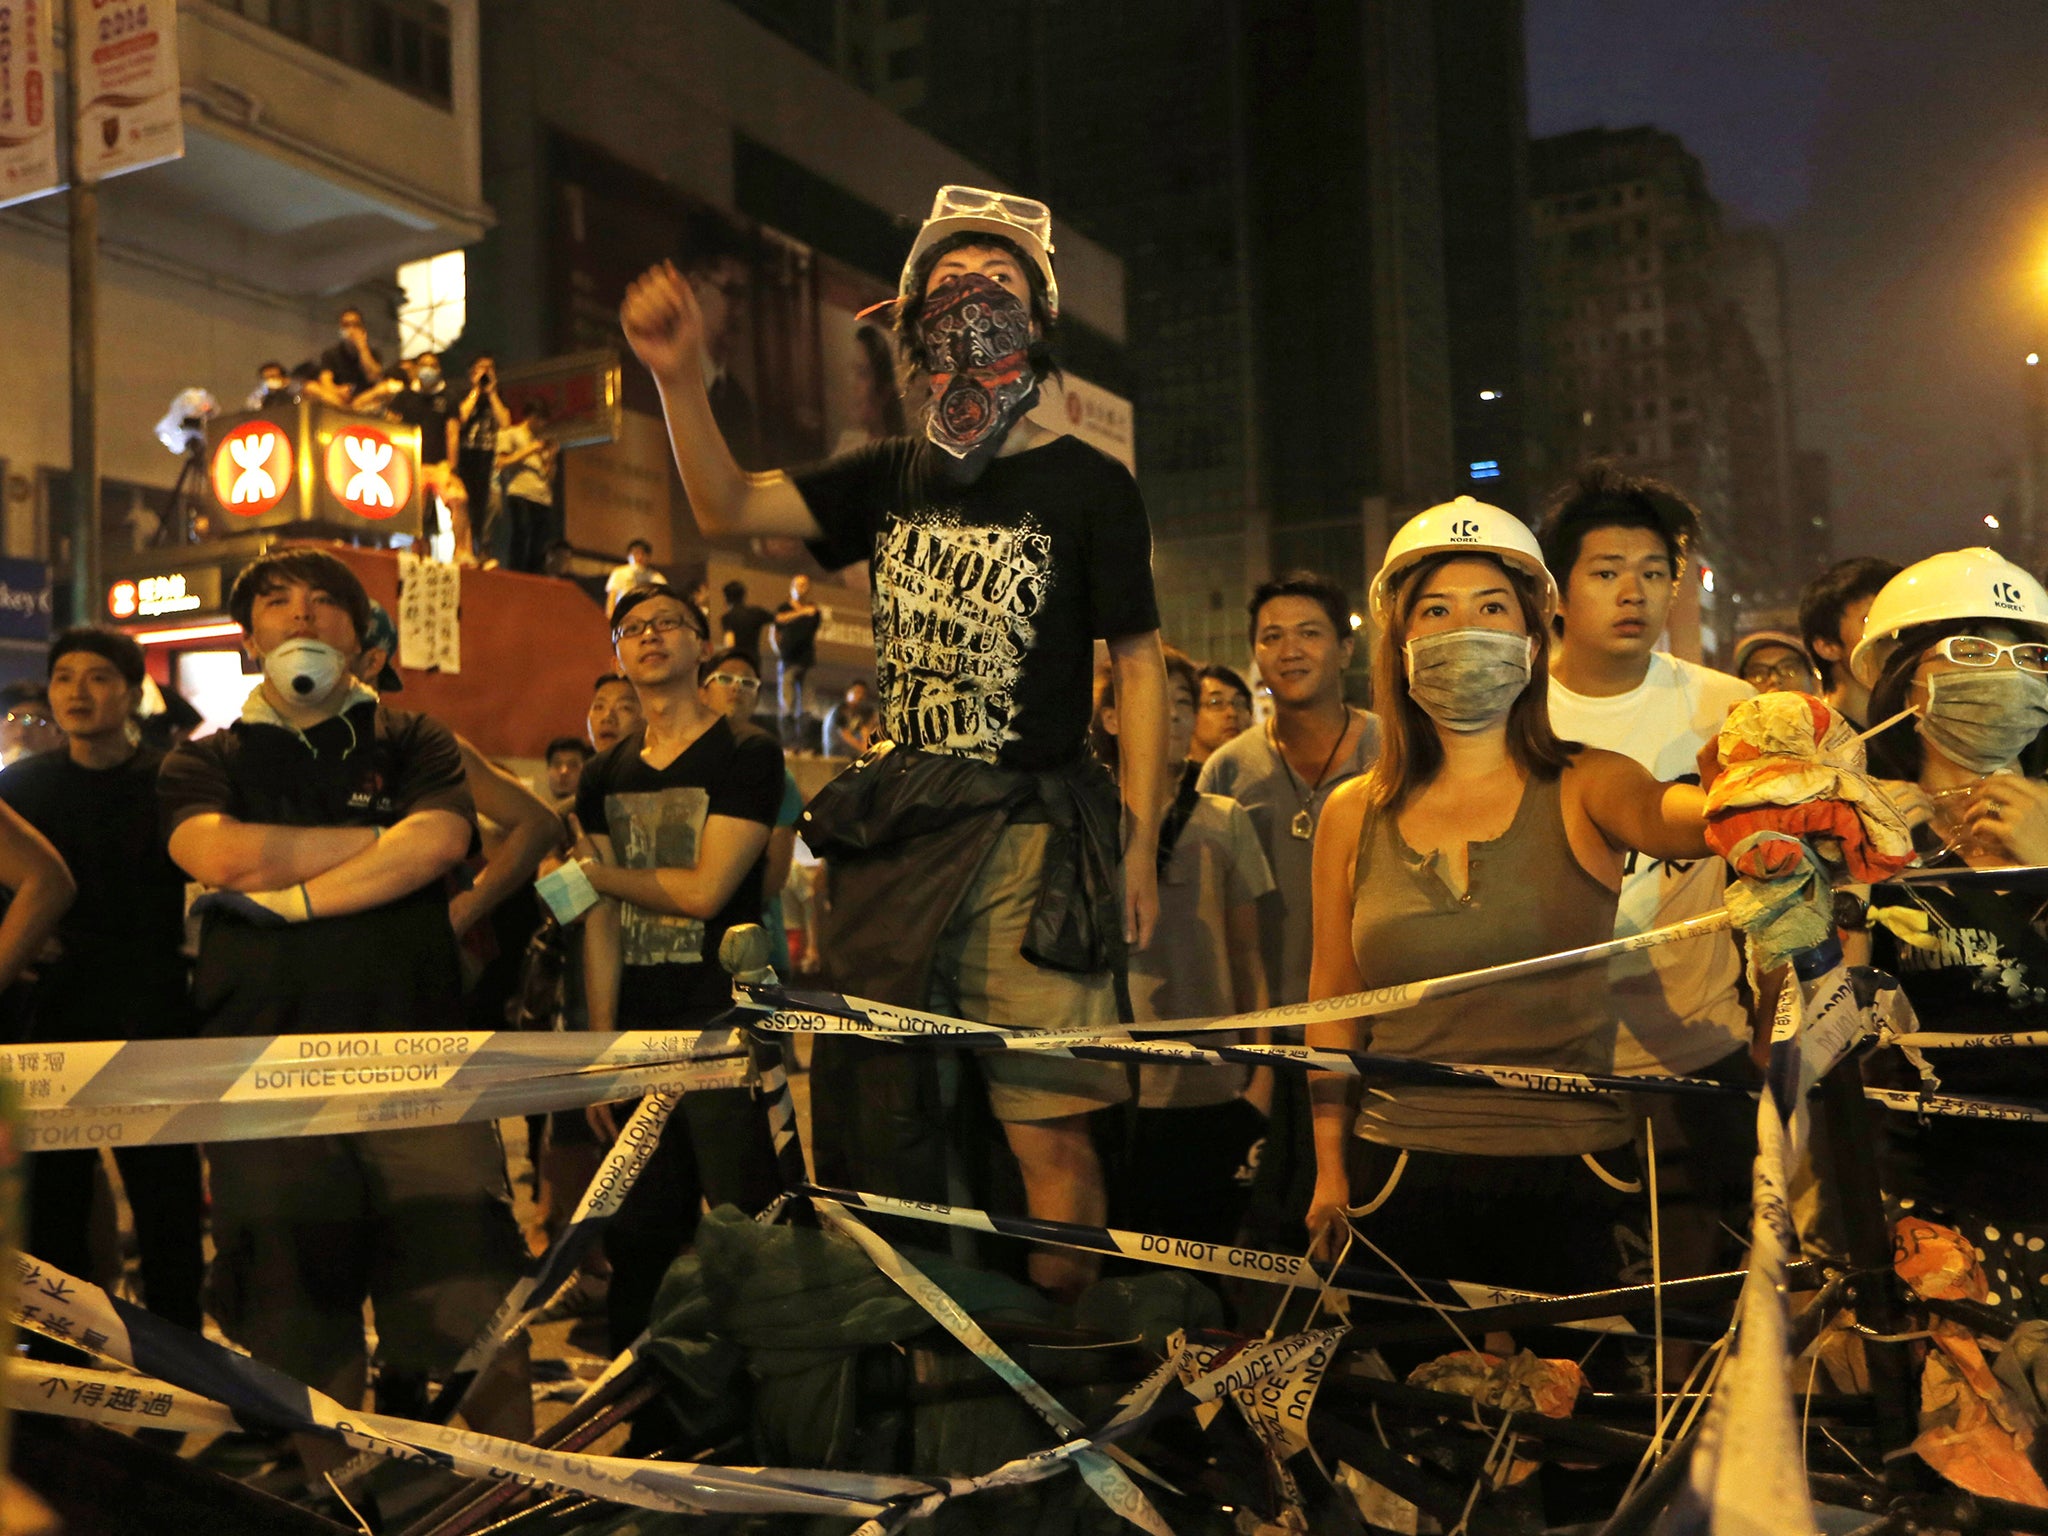 Pro-democracy demonstrators occupy a street in the Mong Kok district of Hong Hong, where some locals have objected to their presence and violence involving Triad gangs has erupted